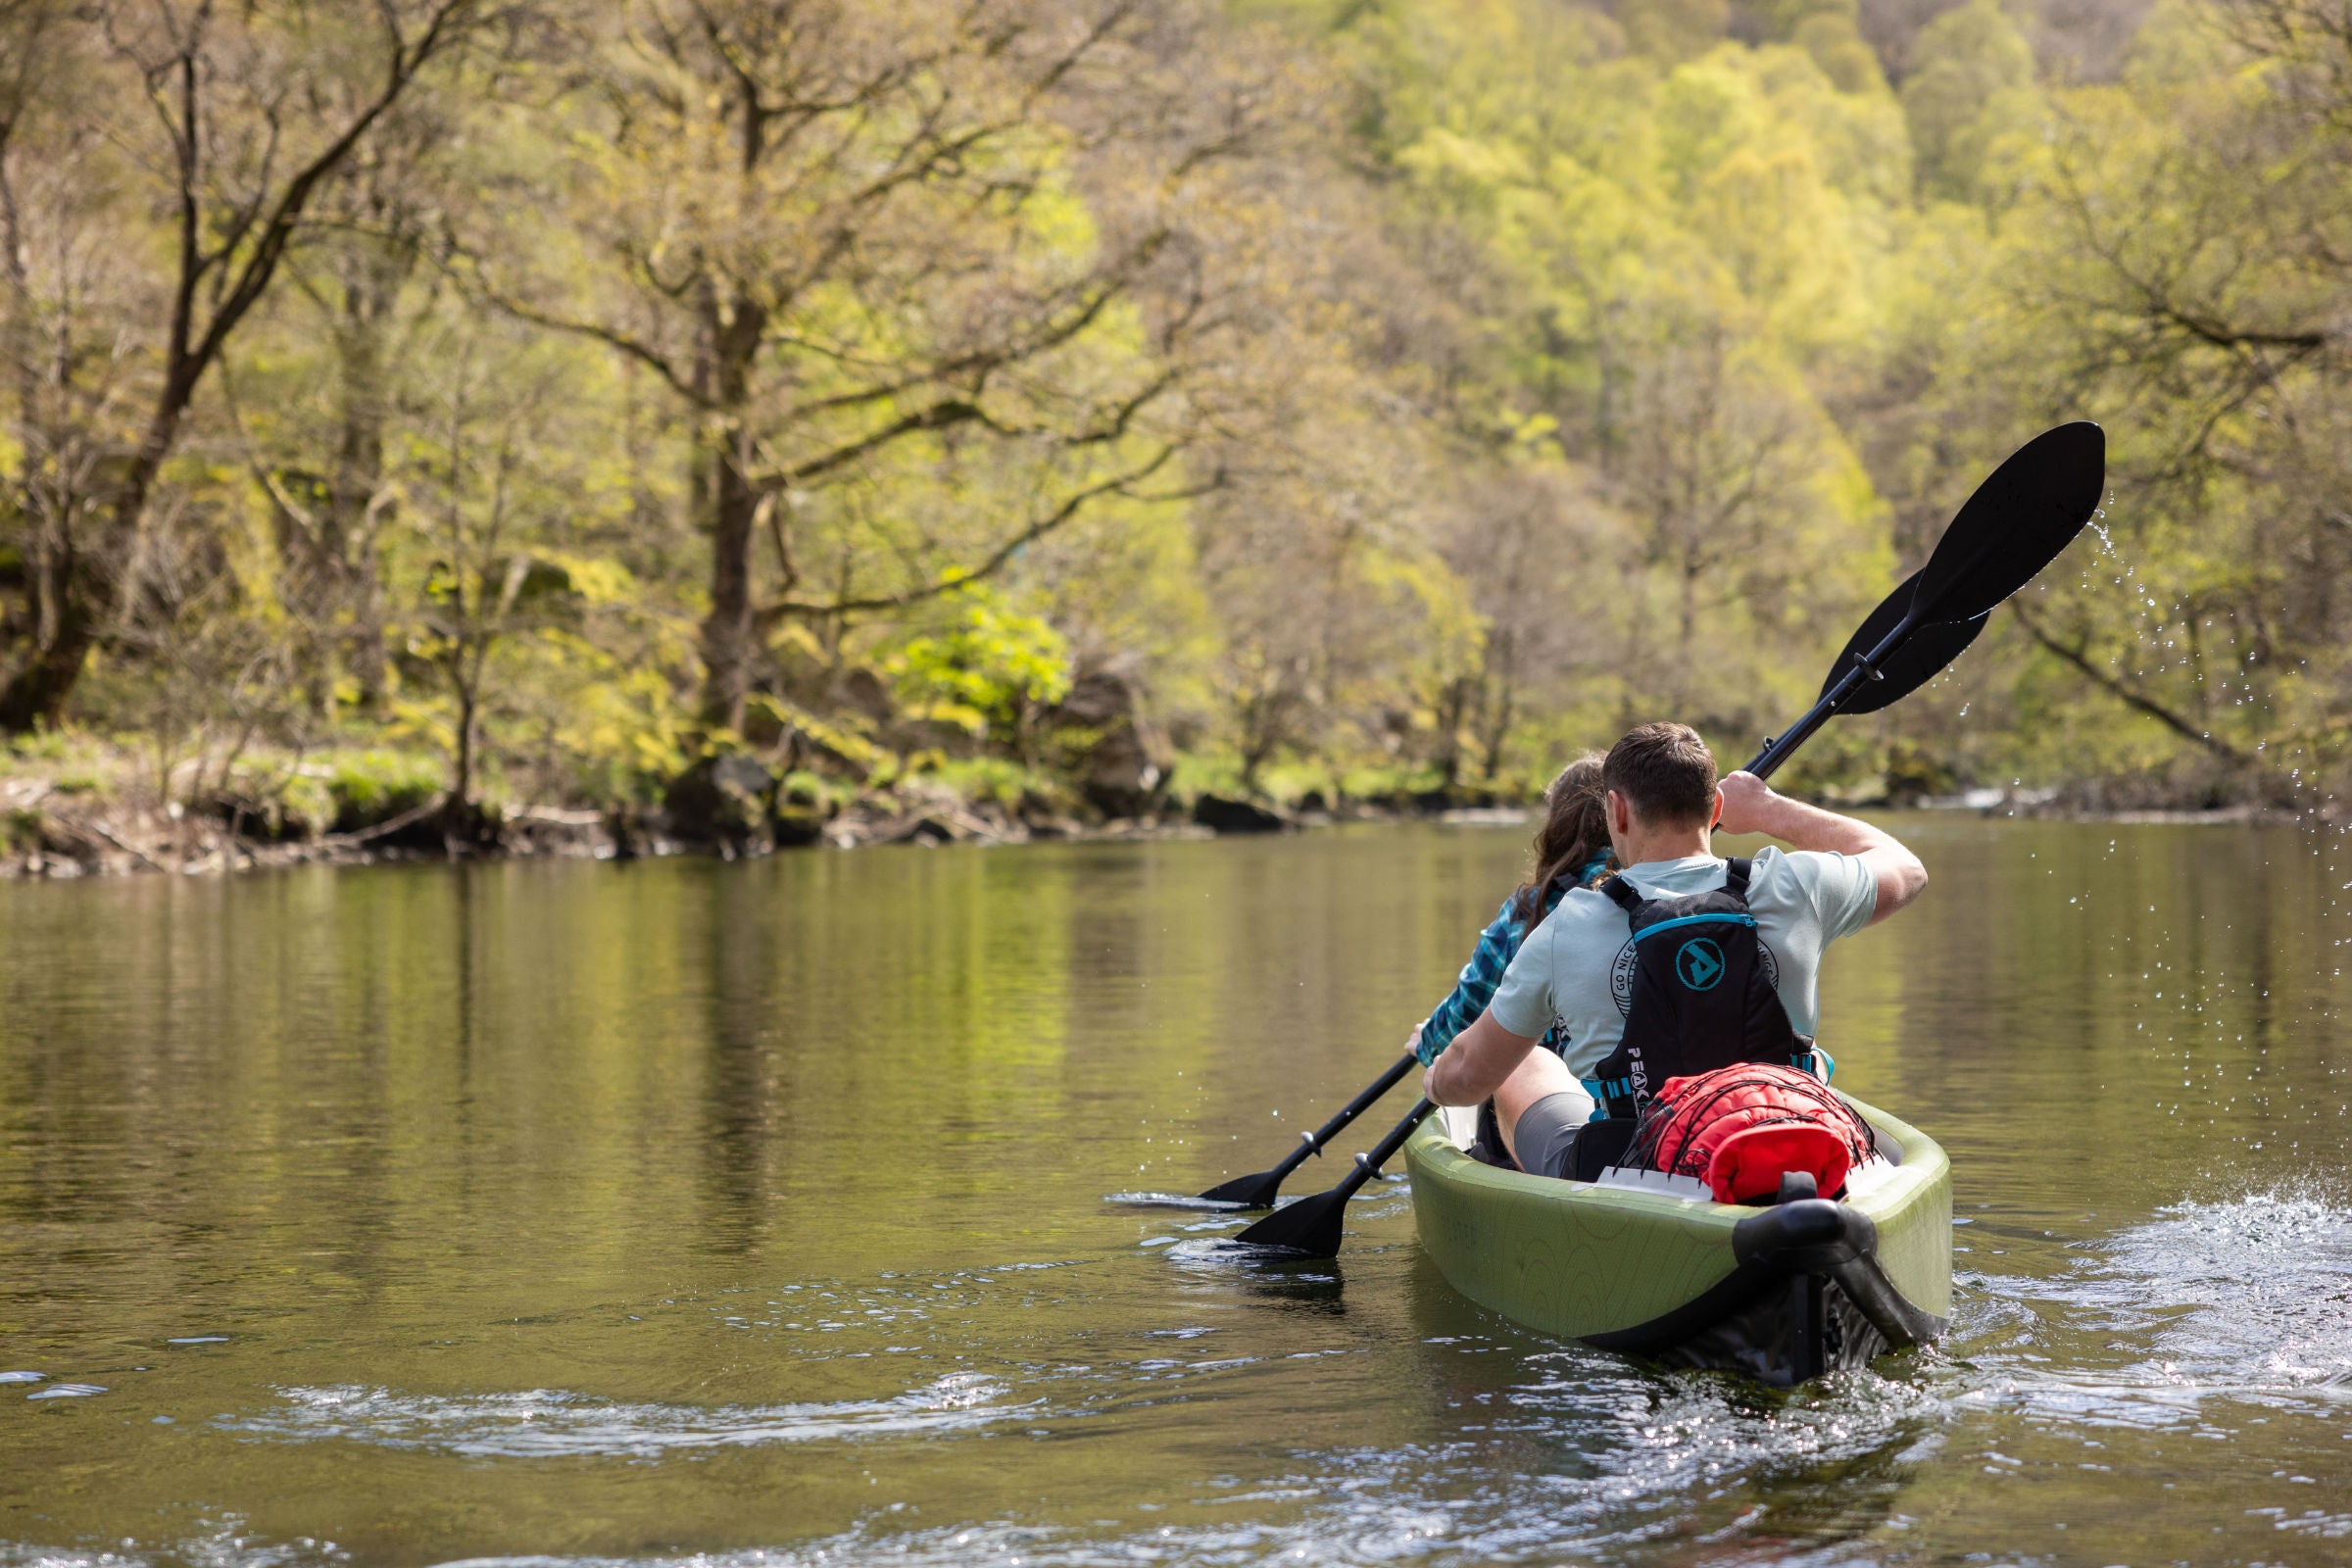 What is the best inflatable canoe for river and lake touring?